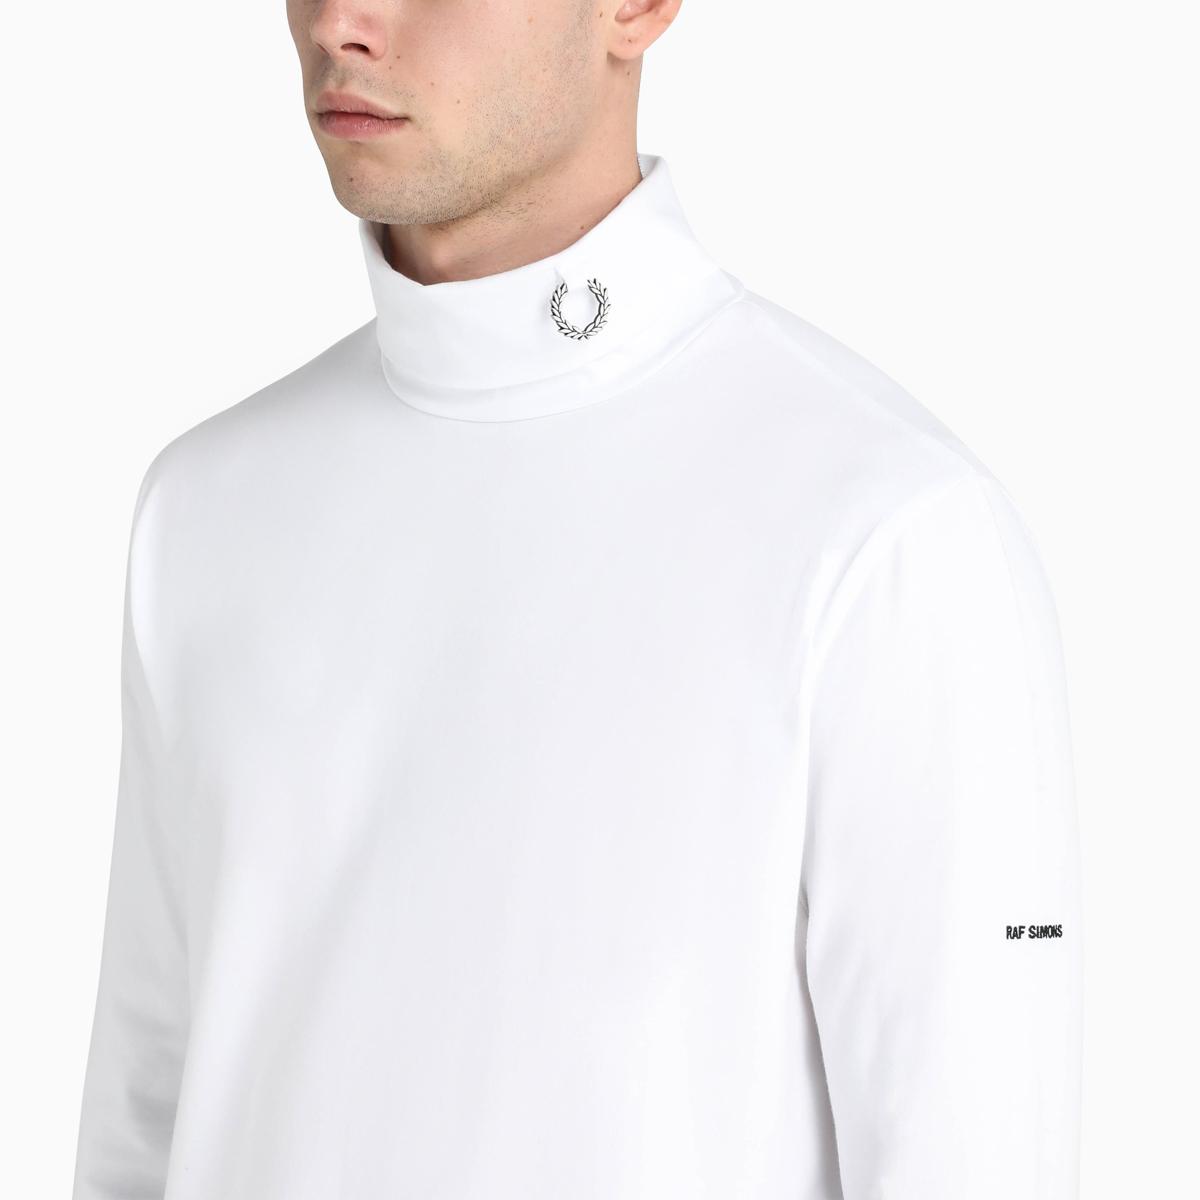 Fred Perry Cotton White Turtleneck Sweater Raf Simons for Men | Lyst